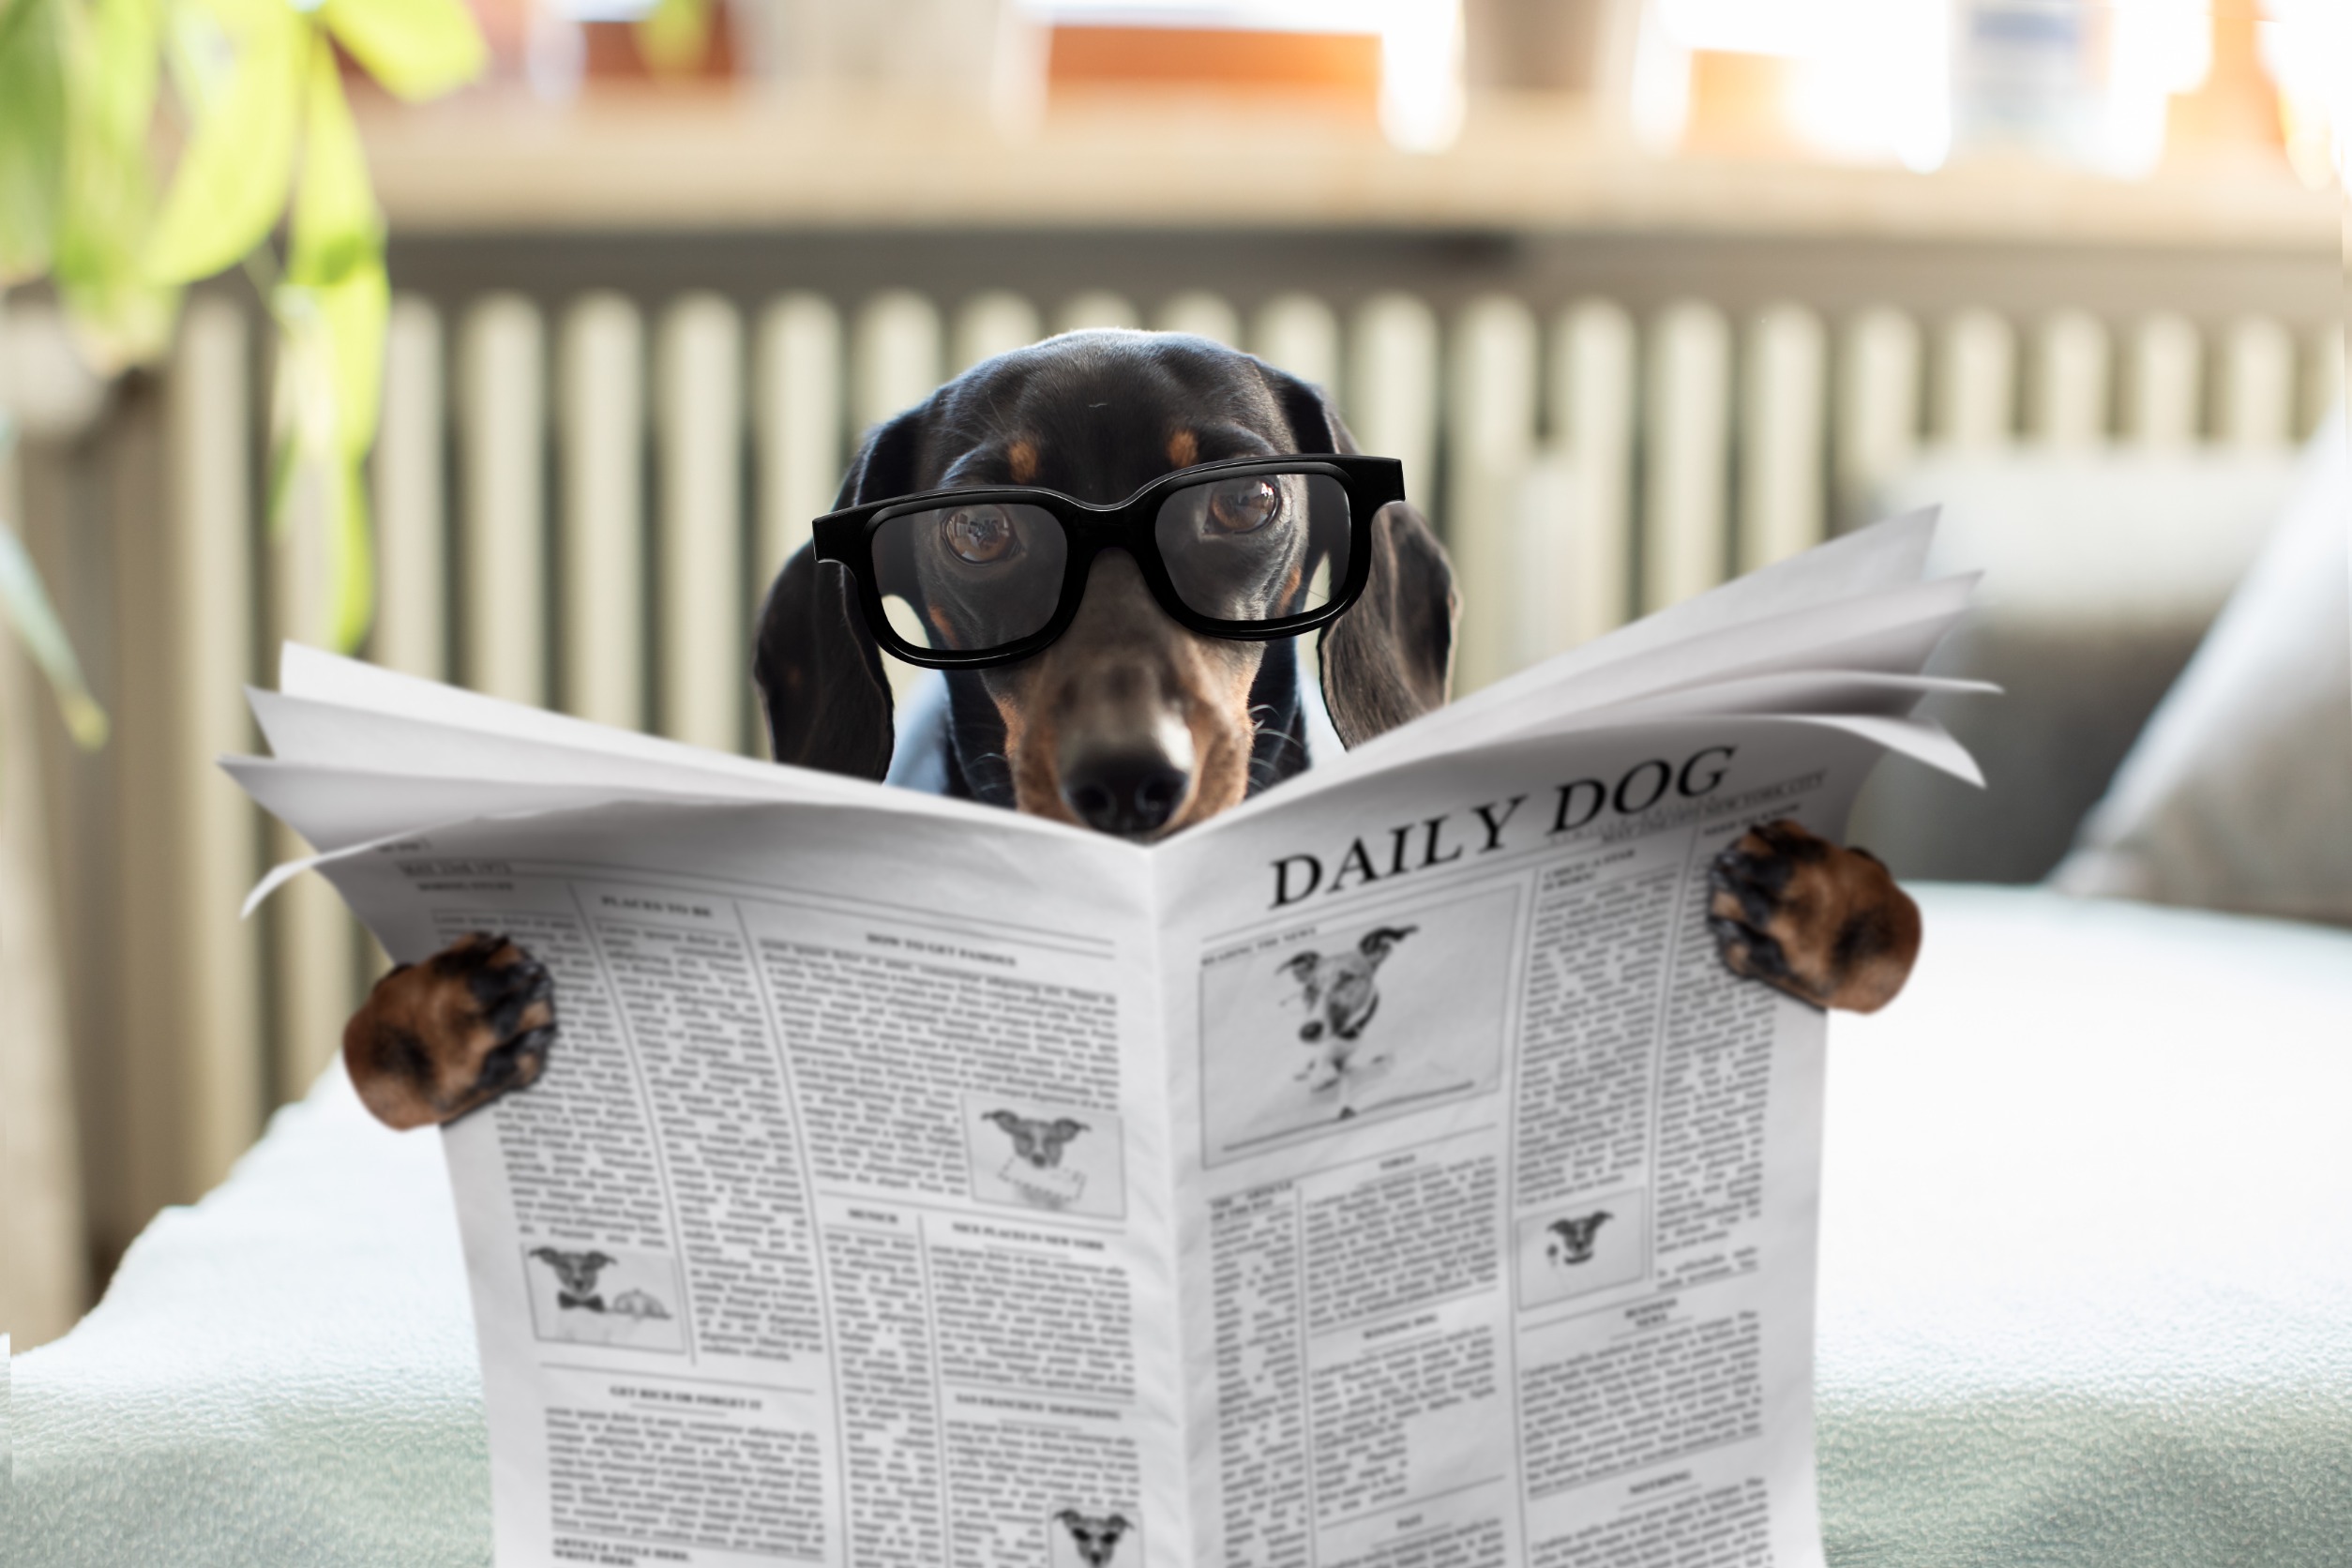 Pioneer Talent image showing a dog reading a newspaper